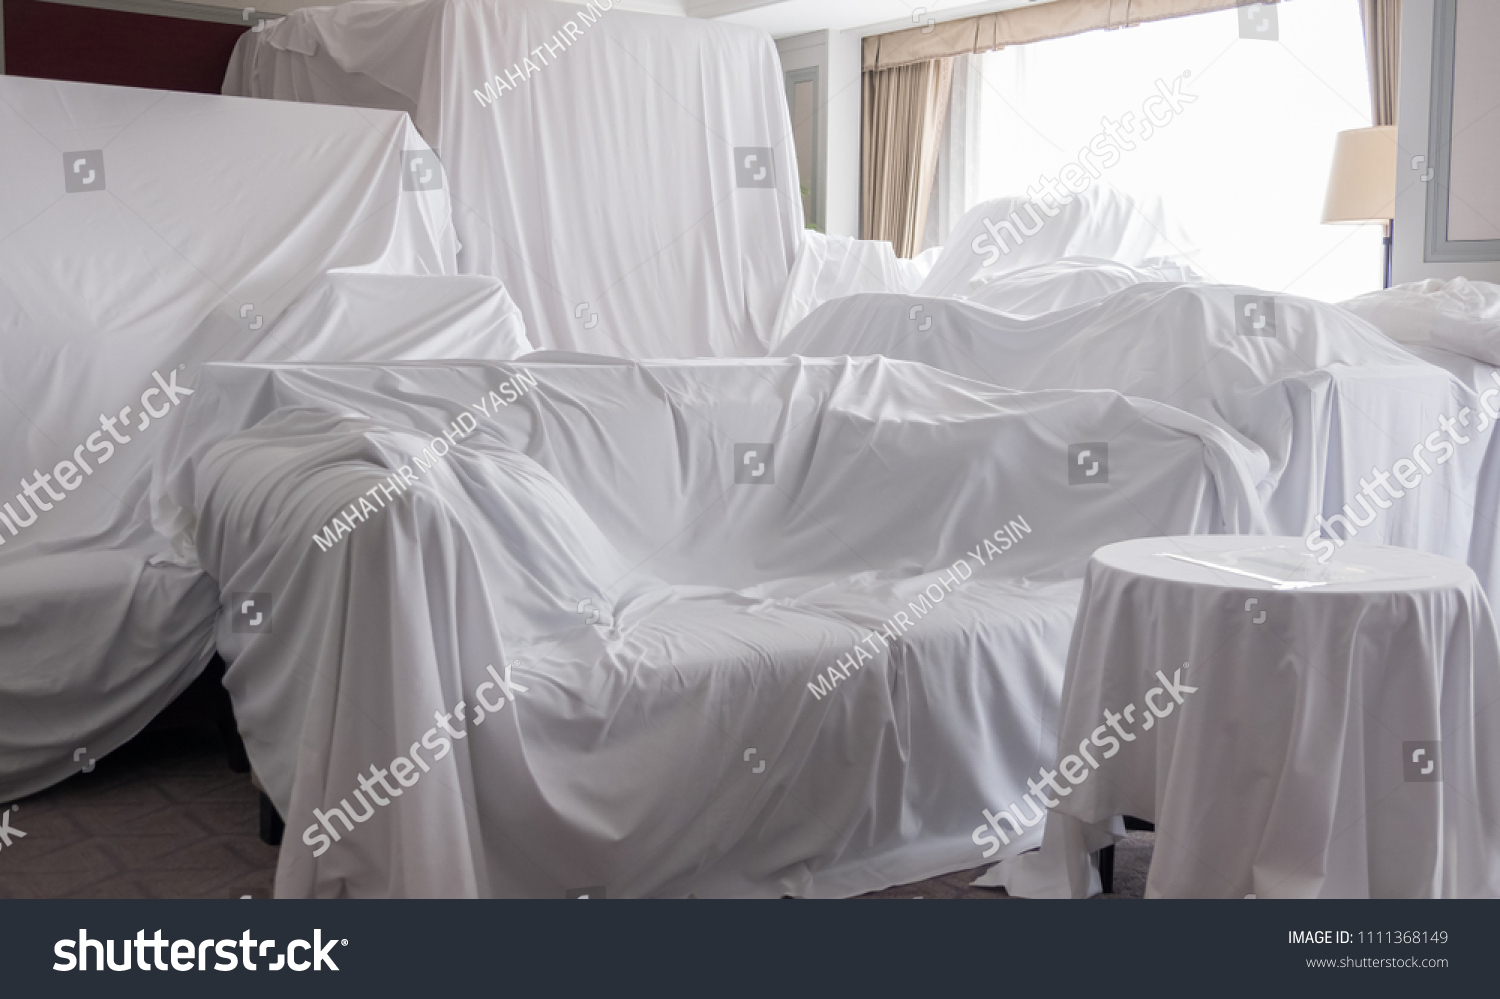 White dust cover cloth covering furnitures in a room #1111368149